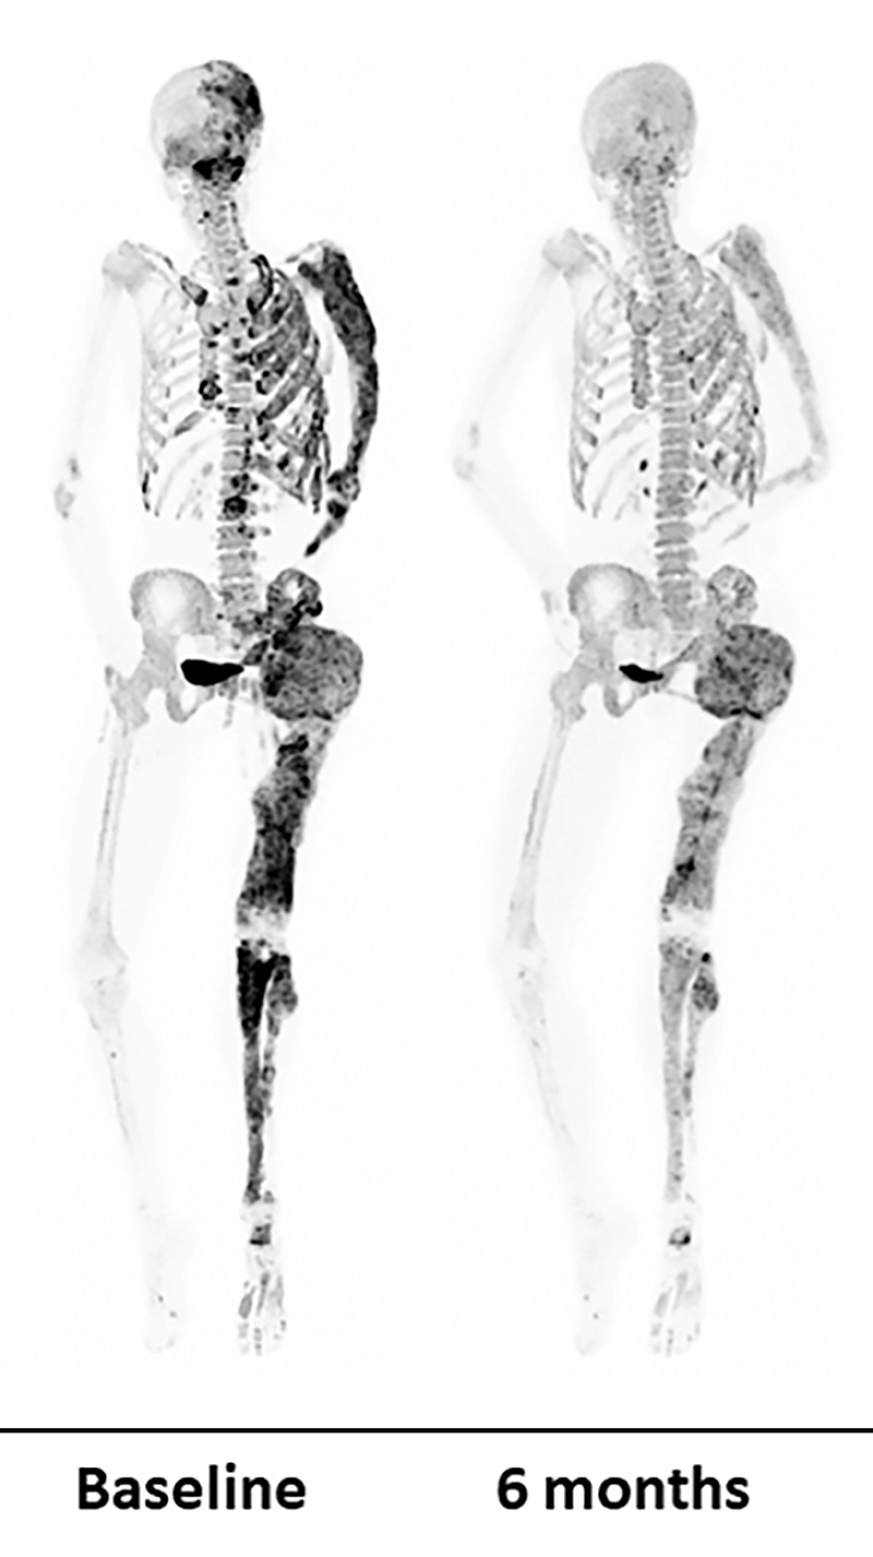 Before and after bone scans